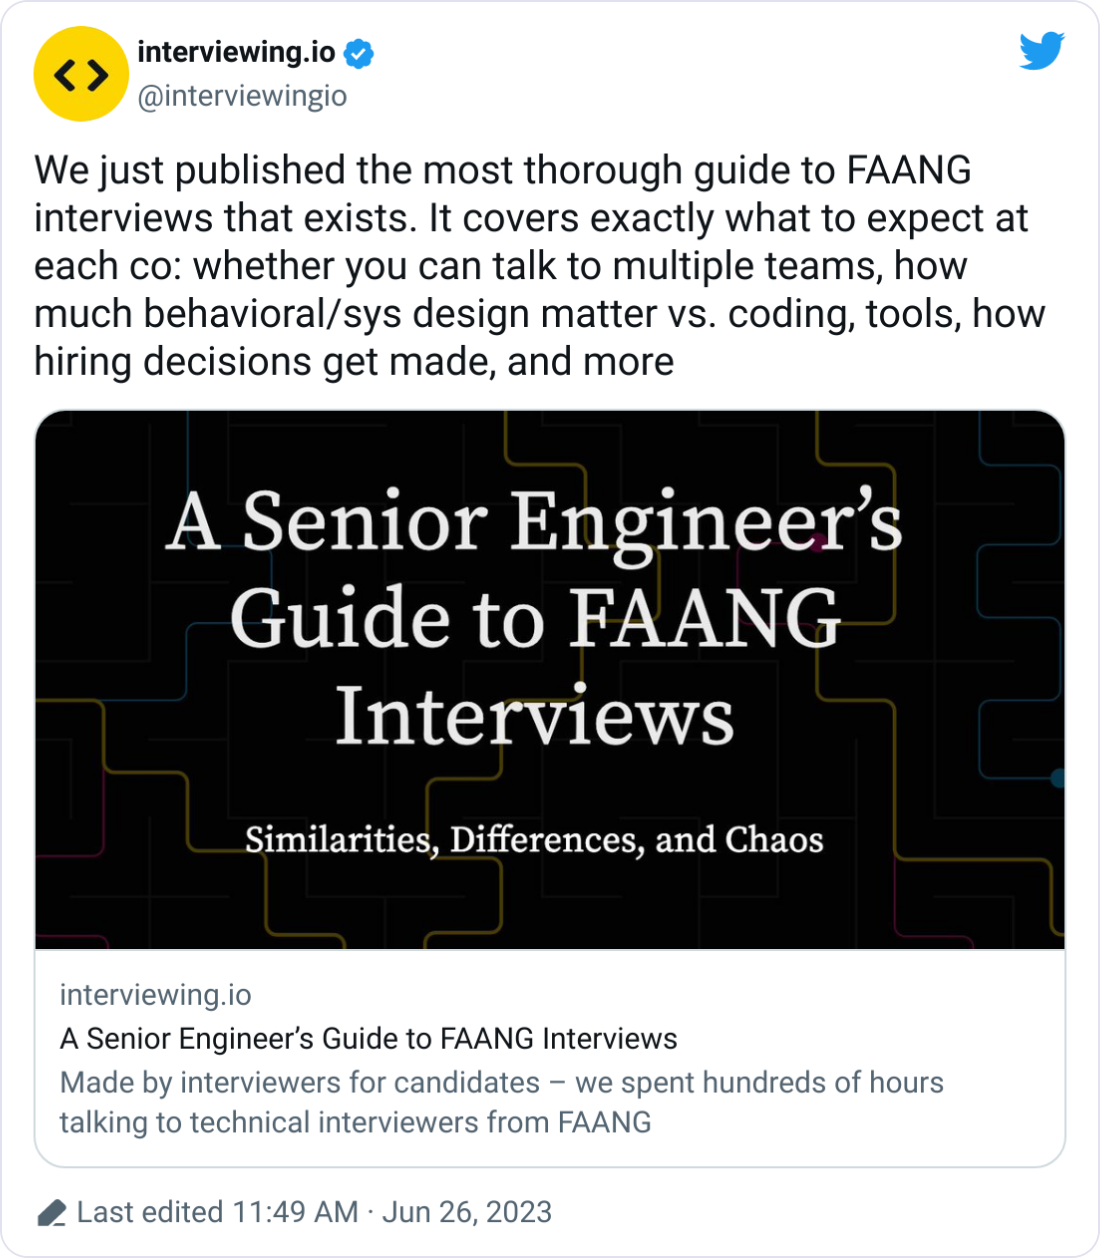 interviewing.io @interviewingio We just published the most thorough guide to FAANG interviews that exists. It covers exactly what to expect at each co: whether you can talk to multiple teams, how much behavioral/sys design matter vs. coding, tools, how hiring decisions get made, and more